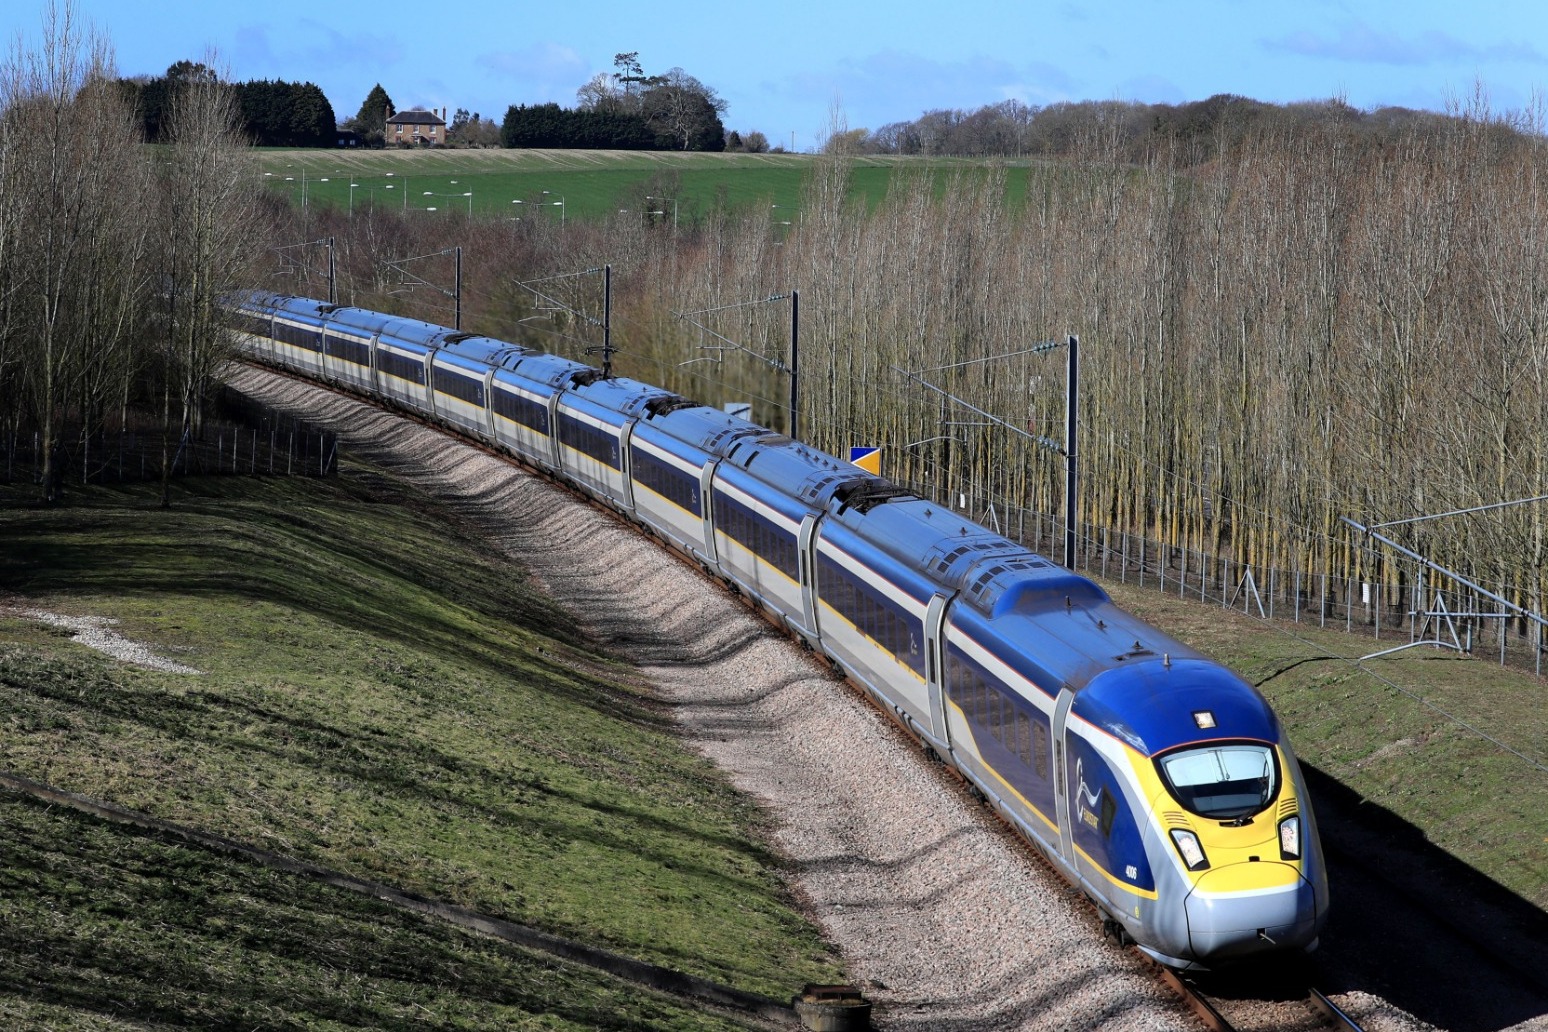 Eurostar to begin direct services from Amsterdam to London in April 